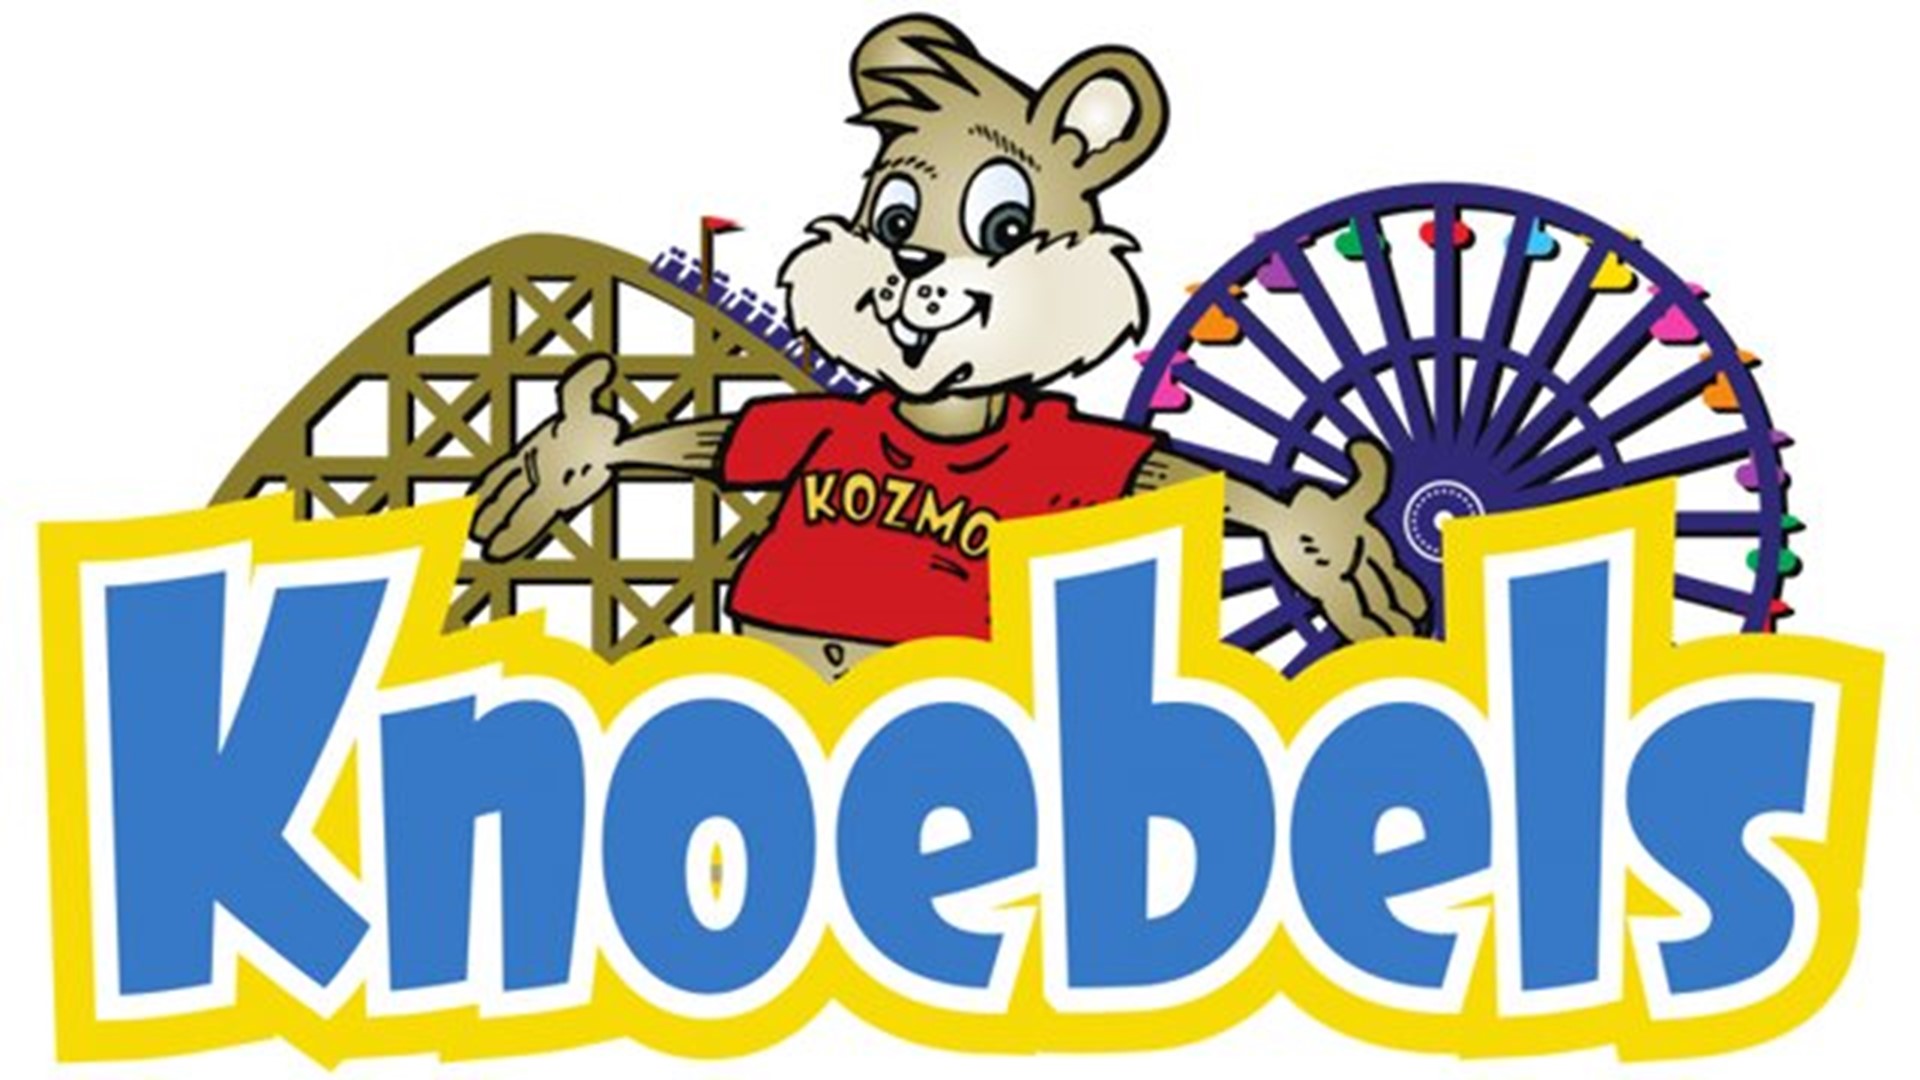 Coronavirus is impacting businesses throughout the area and Knoebels Amusement Resort is no exception